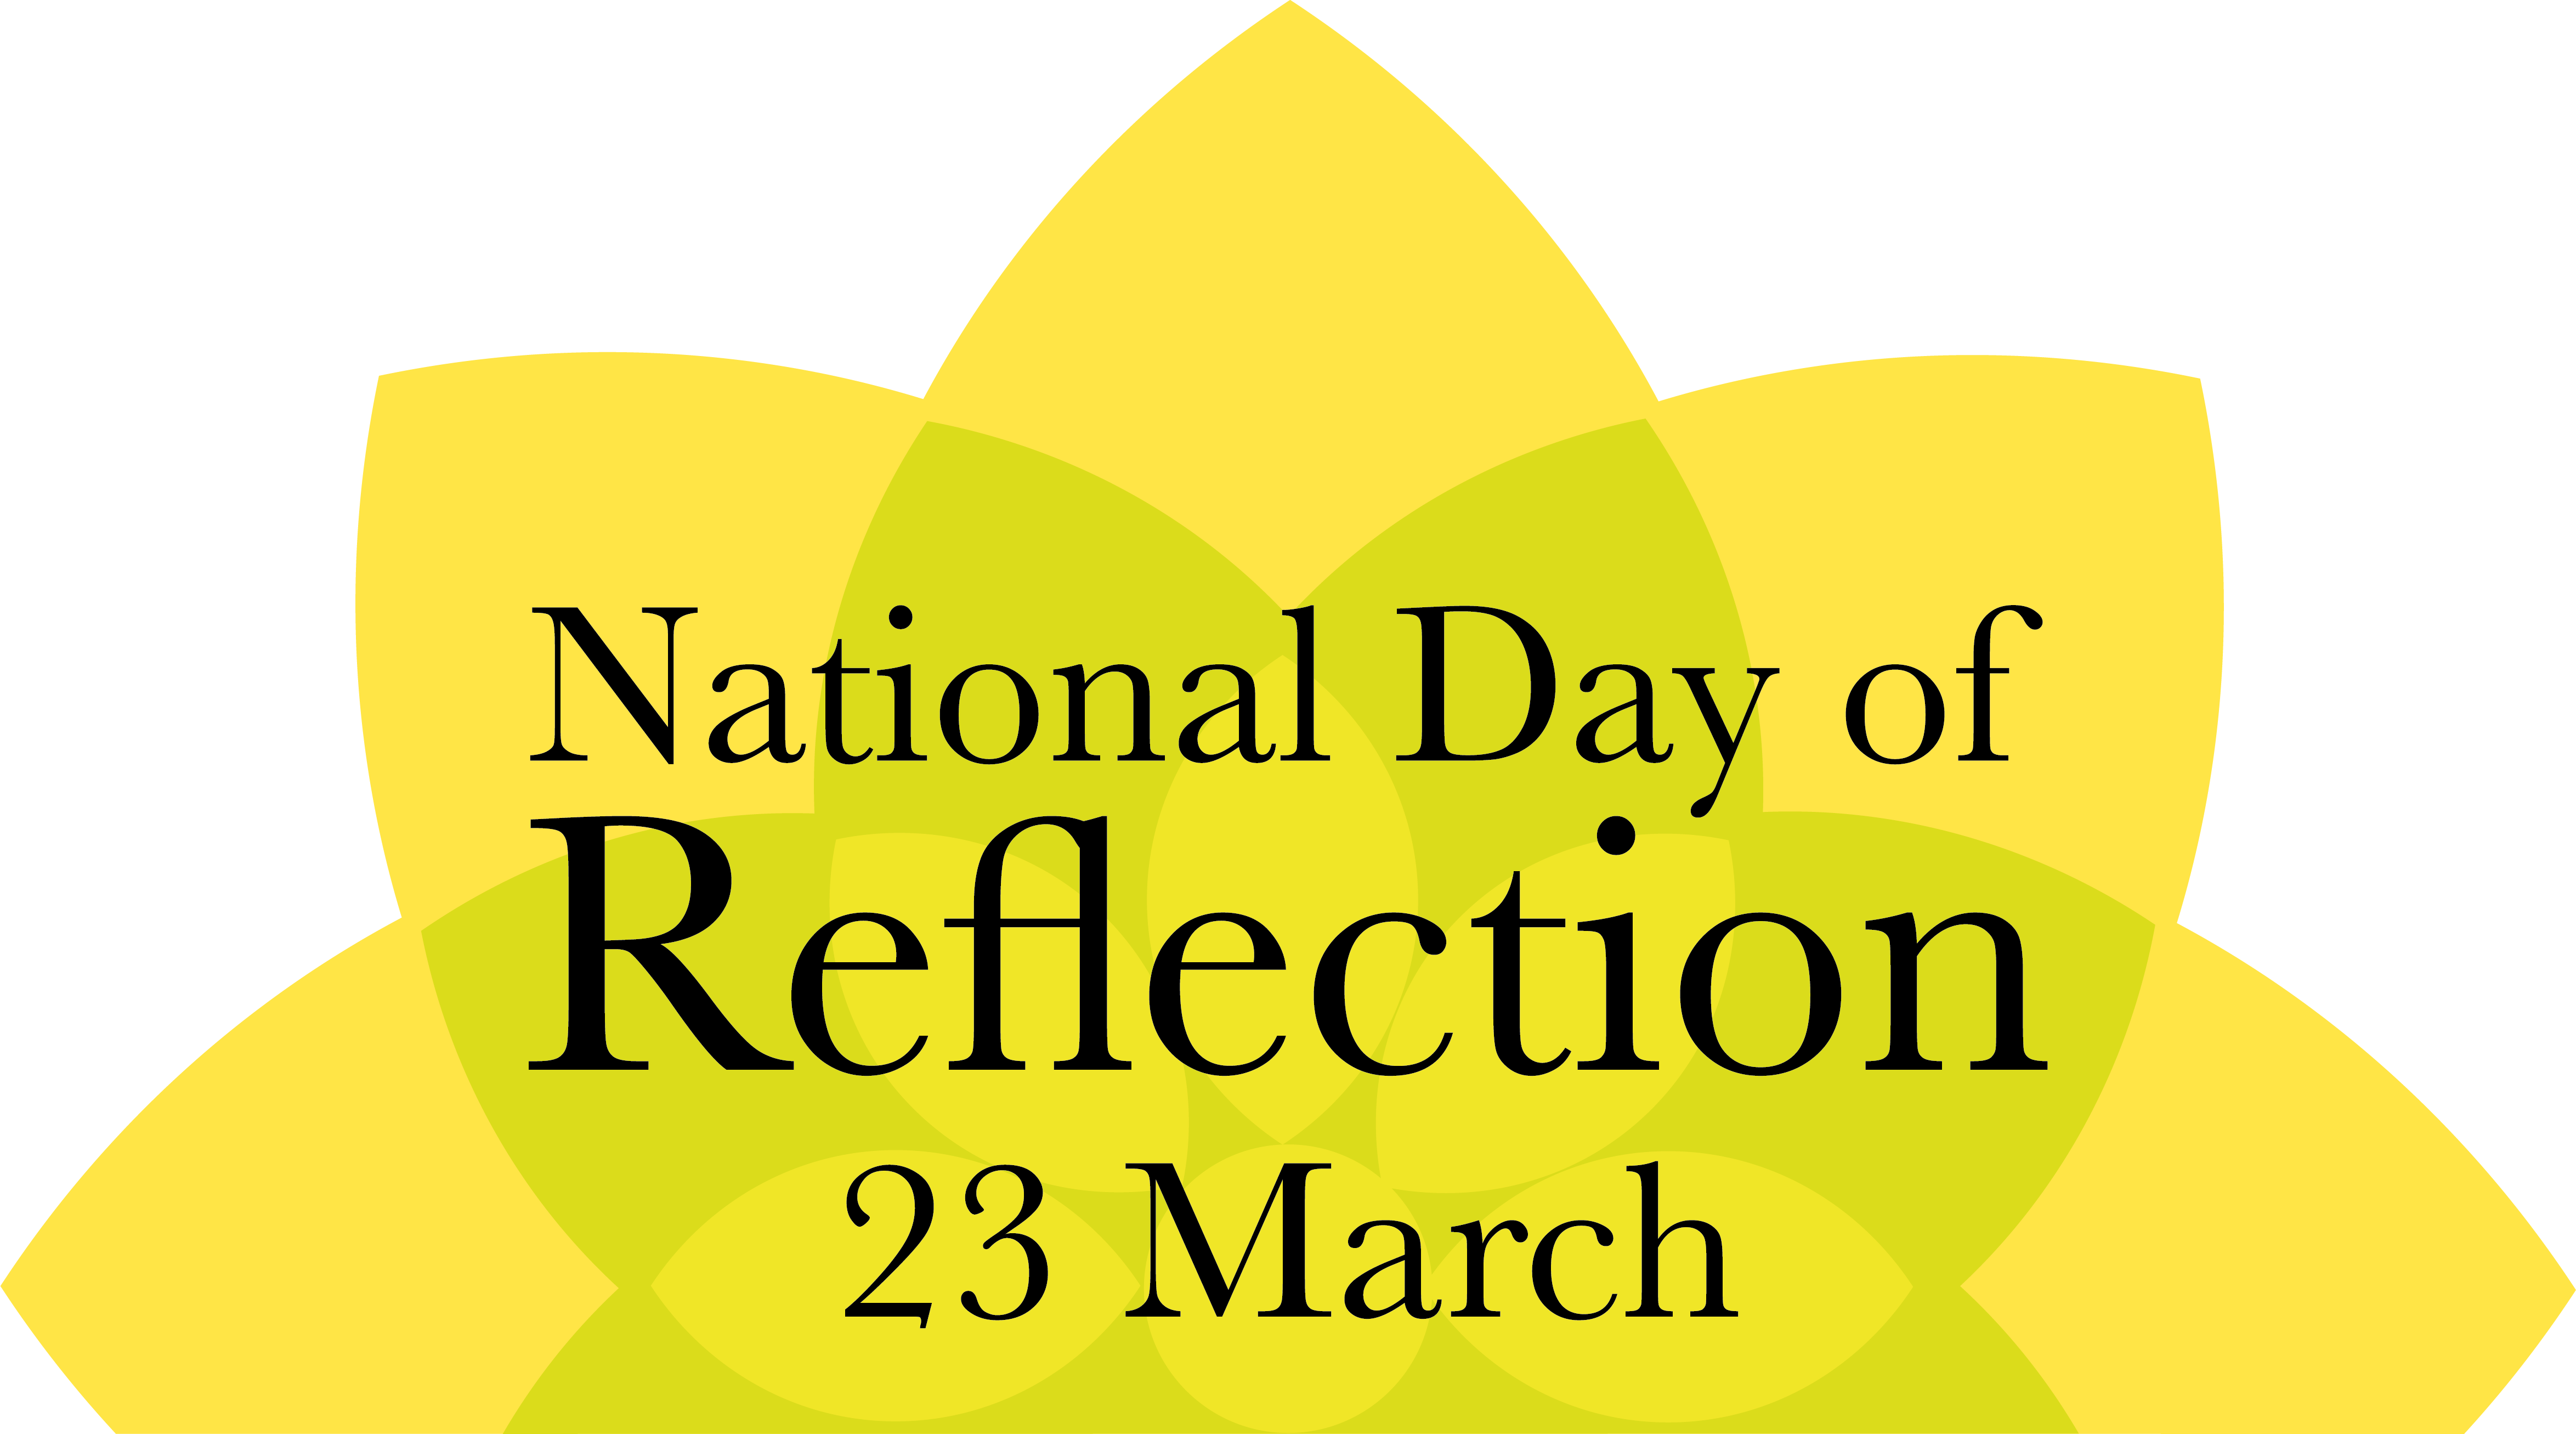 National Day of Reflection - 23rd March 2021